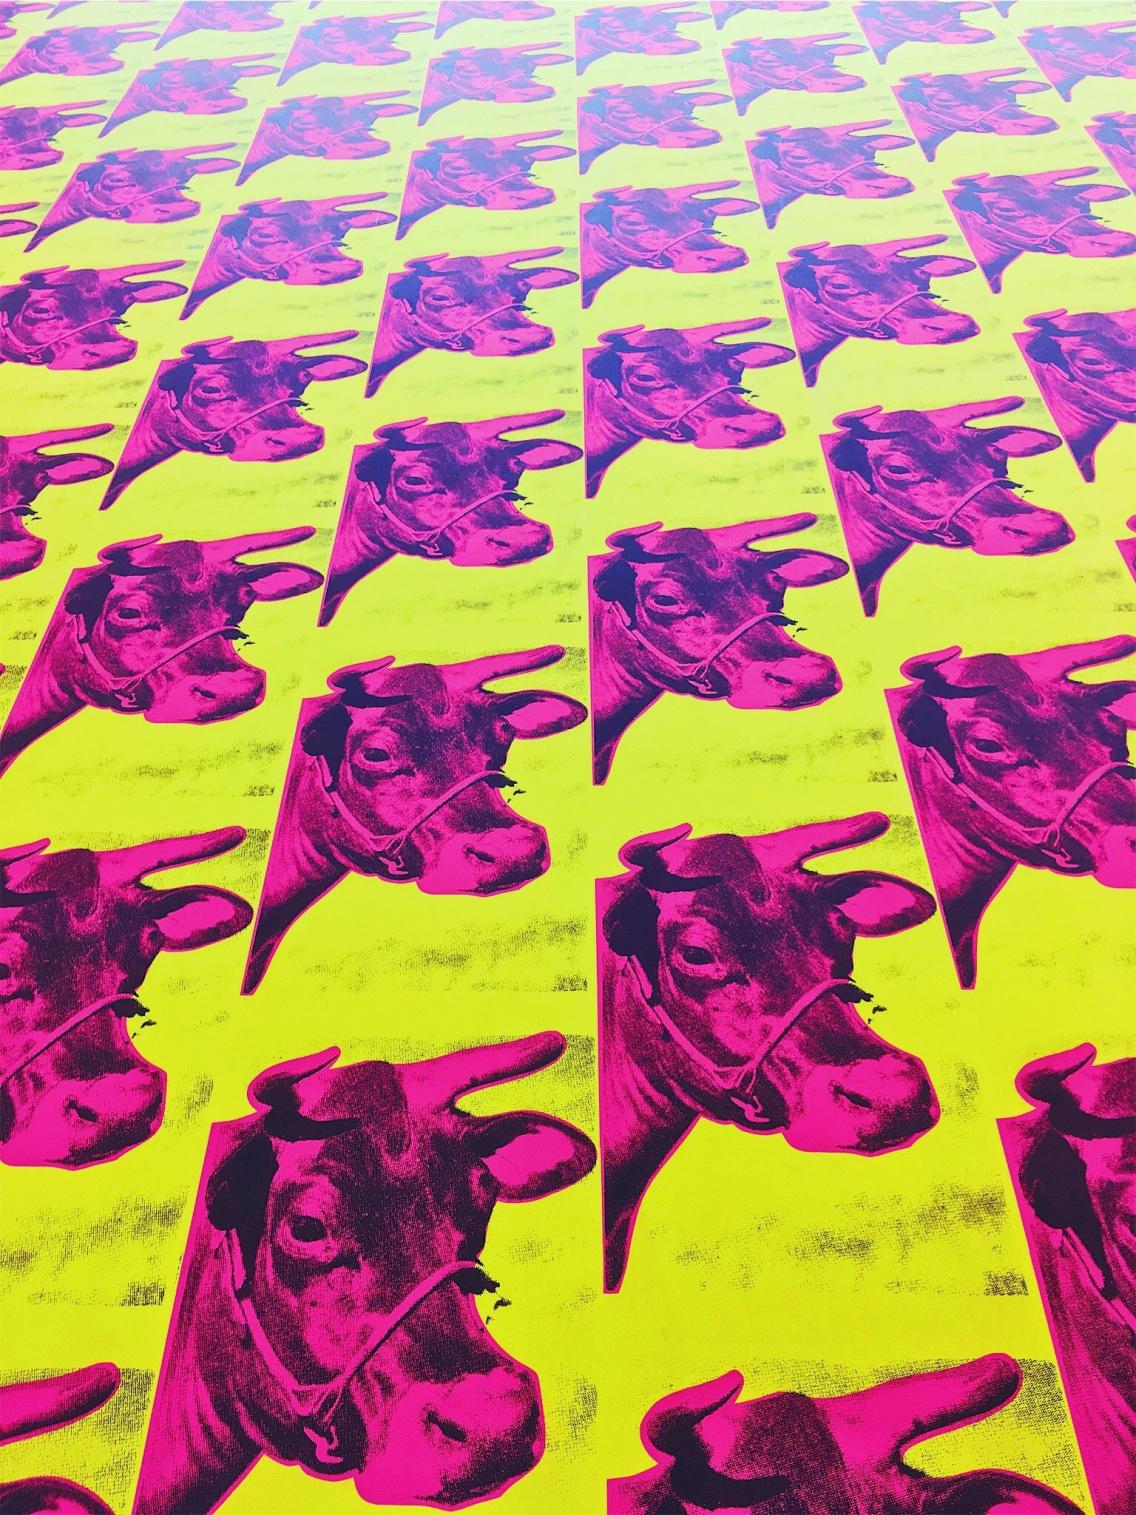 Cow wallpaper by #AndyWarhol